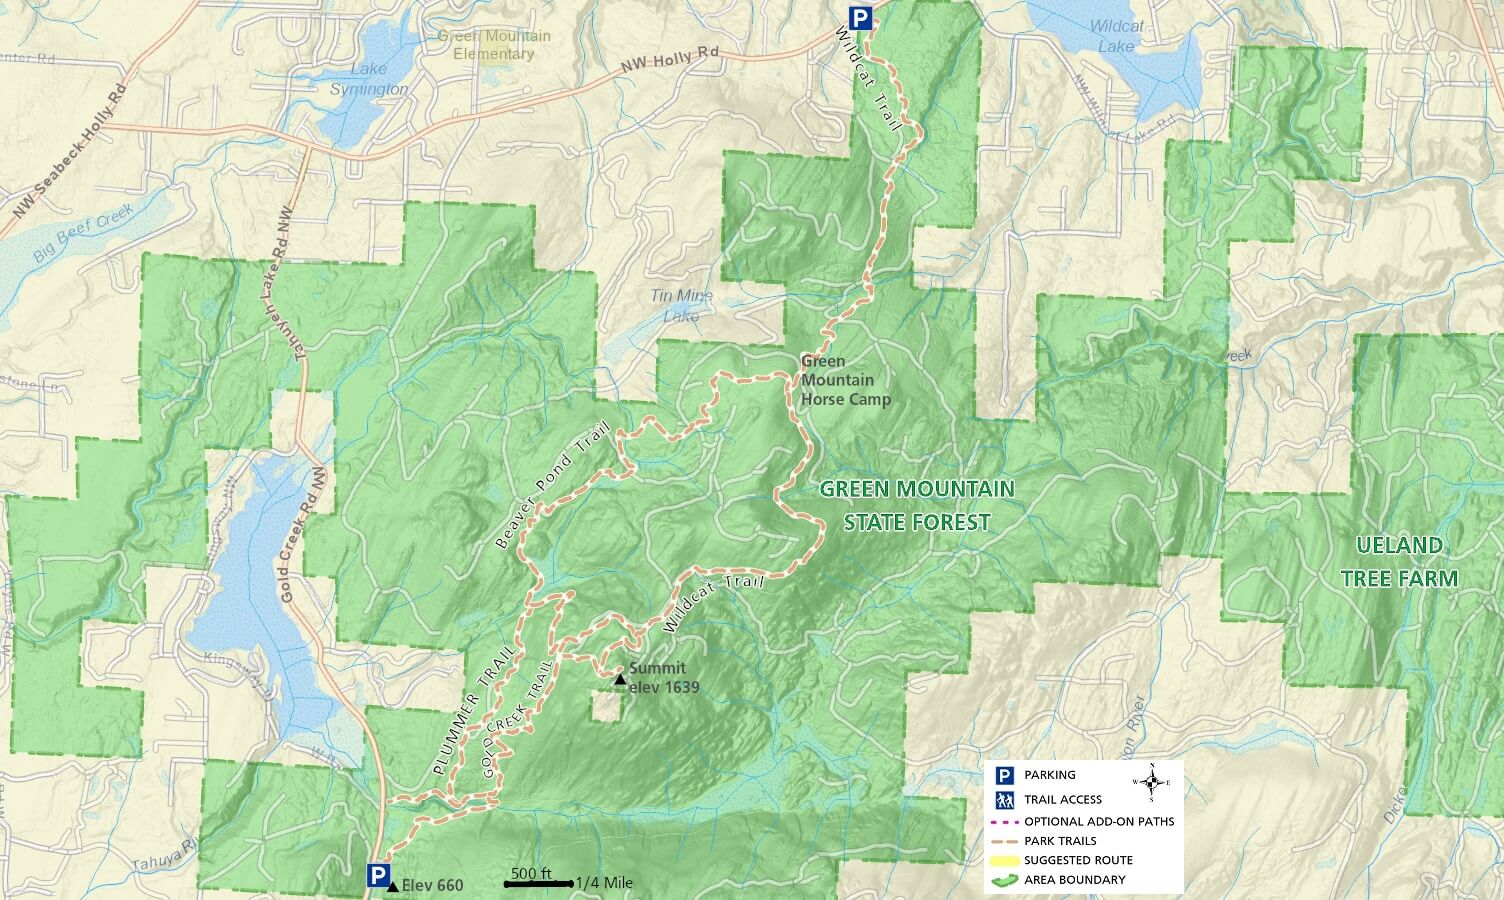 Green Mountain Trail Map - Overview